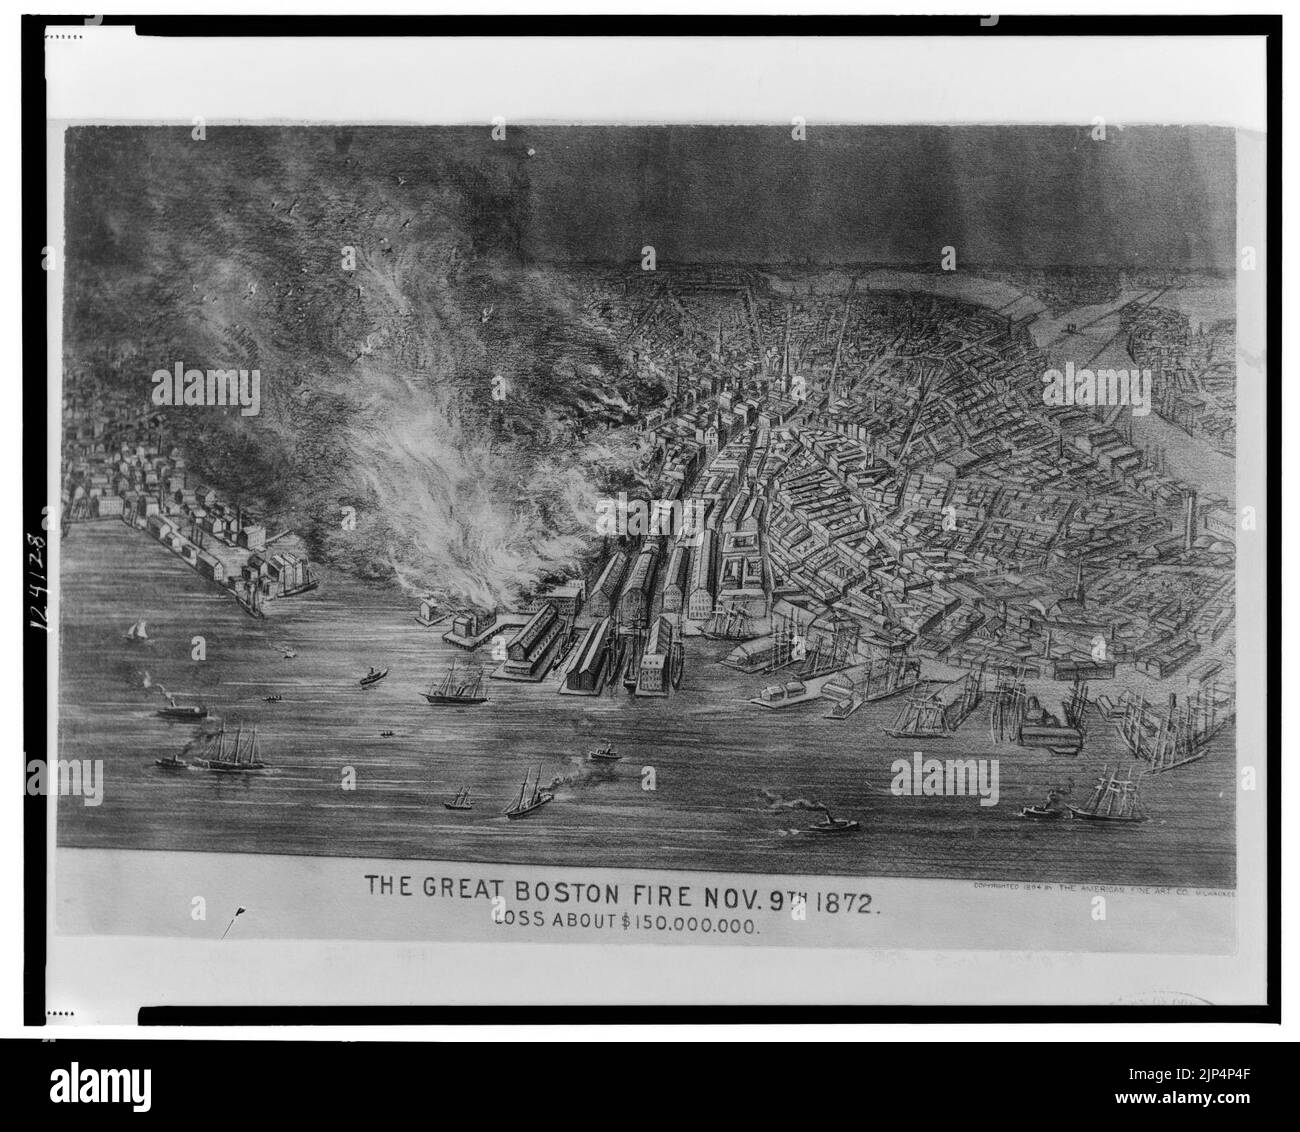 The great Boston fire Nov. 9th 1872-Loss about $150,000,000 Stock Photo